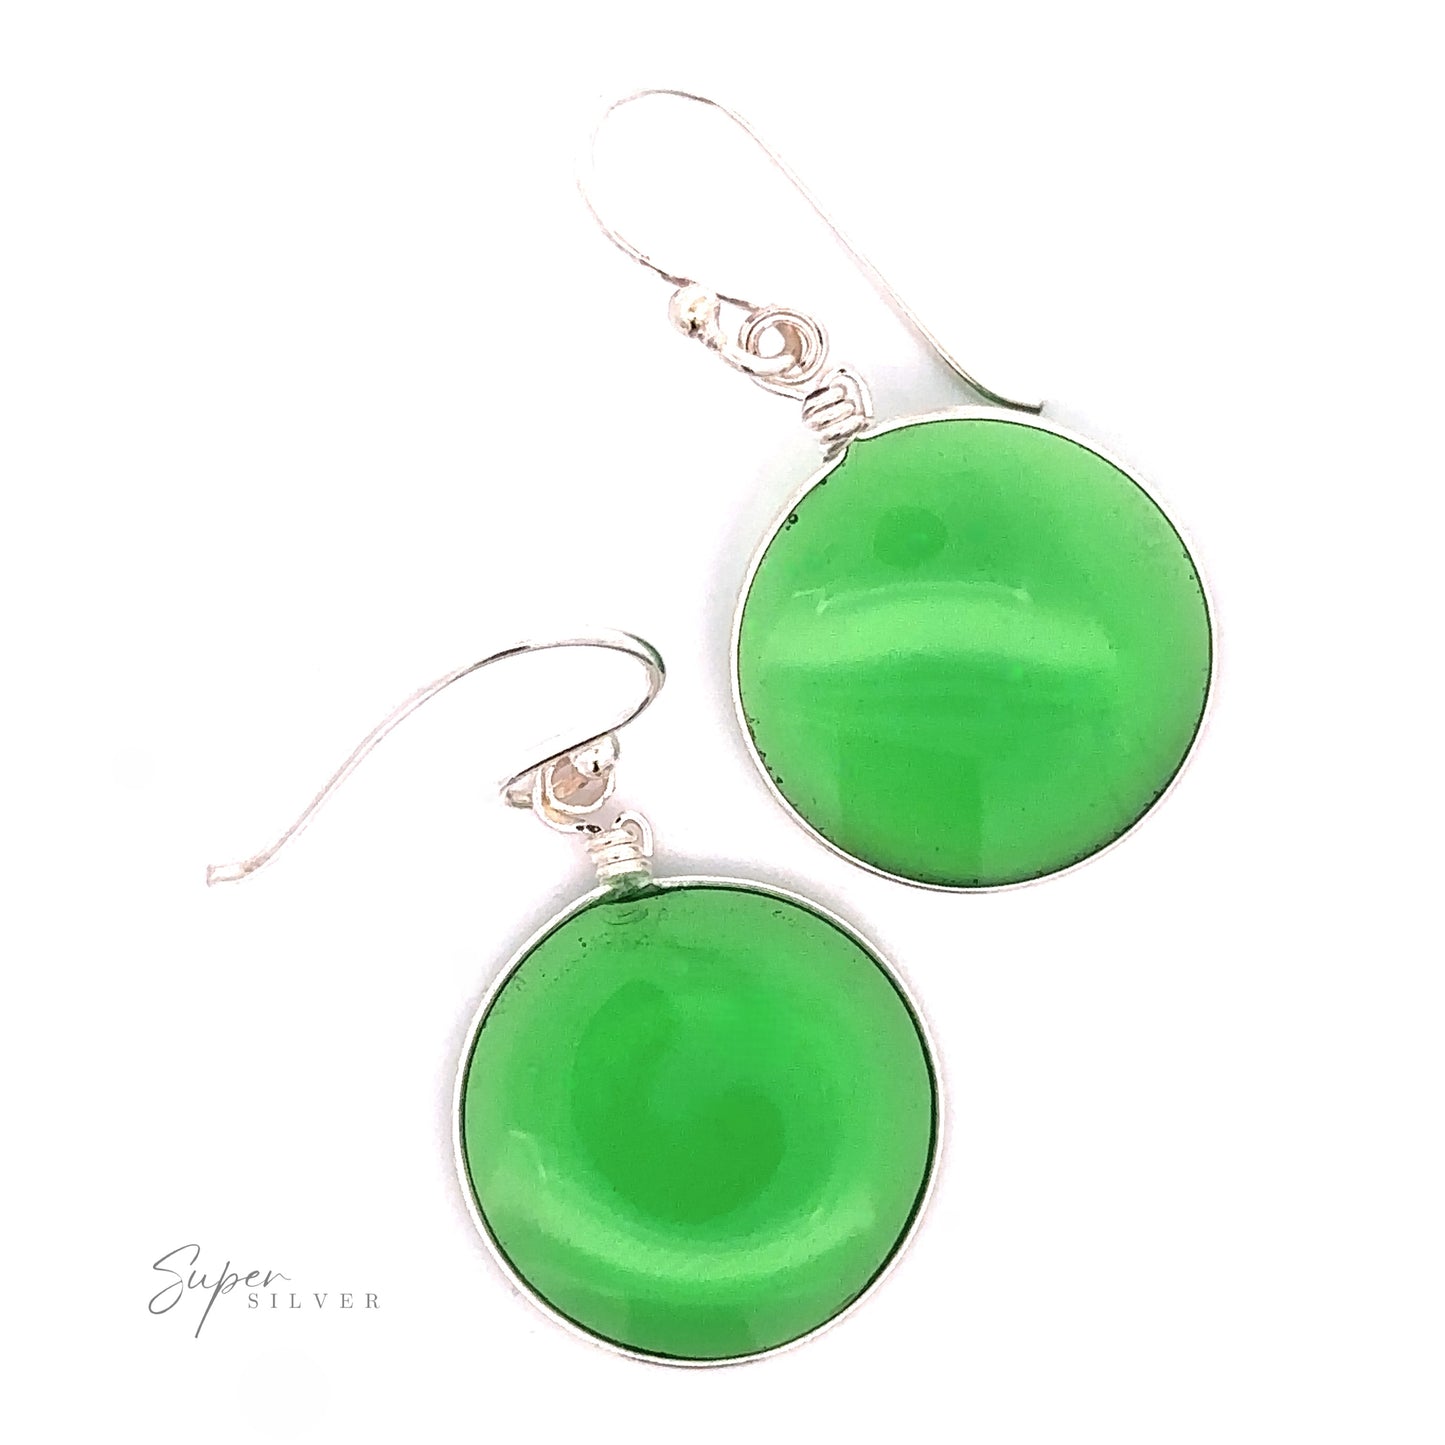 
                  
                    A pair of Round Glass Earrings with .925 Sterling Silver hooks. The earrings have a glossy finish and are labeled "Super Silver" in the corner.
                  
                